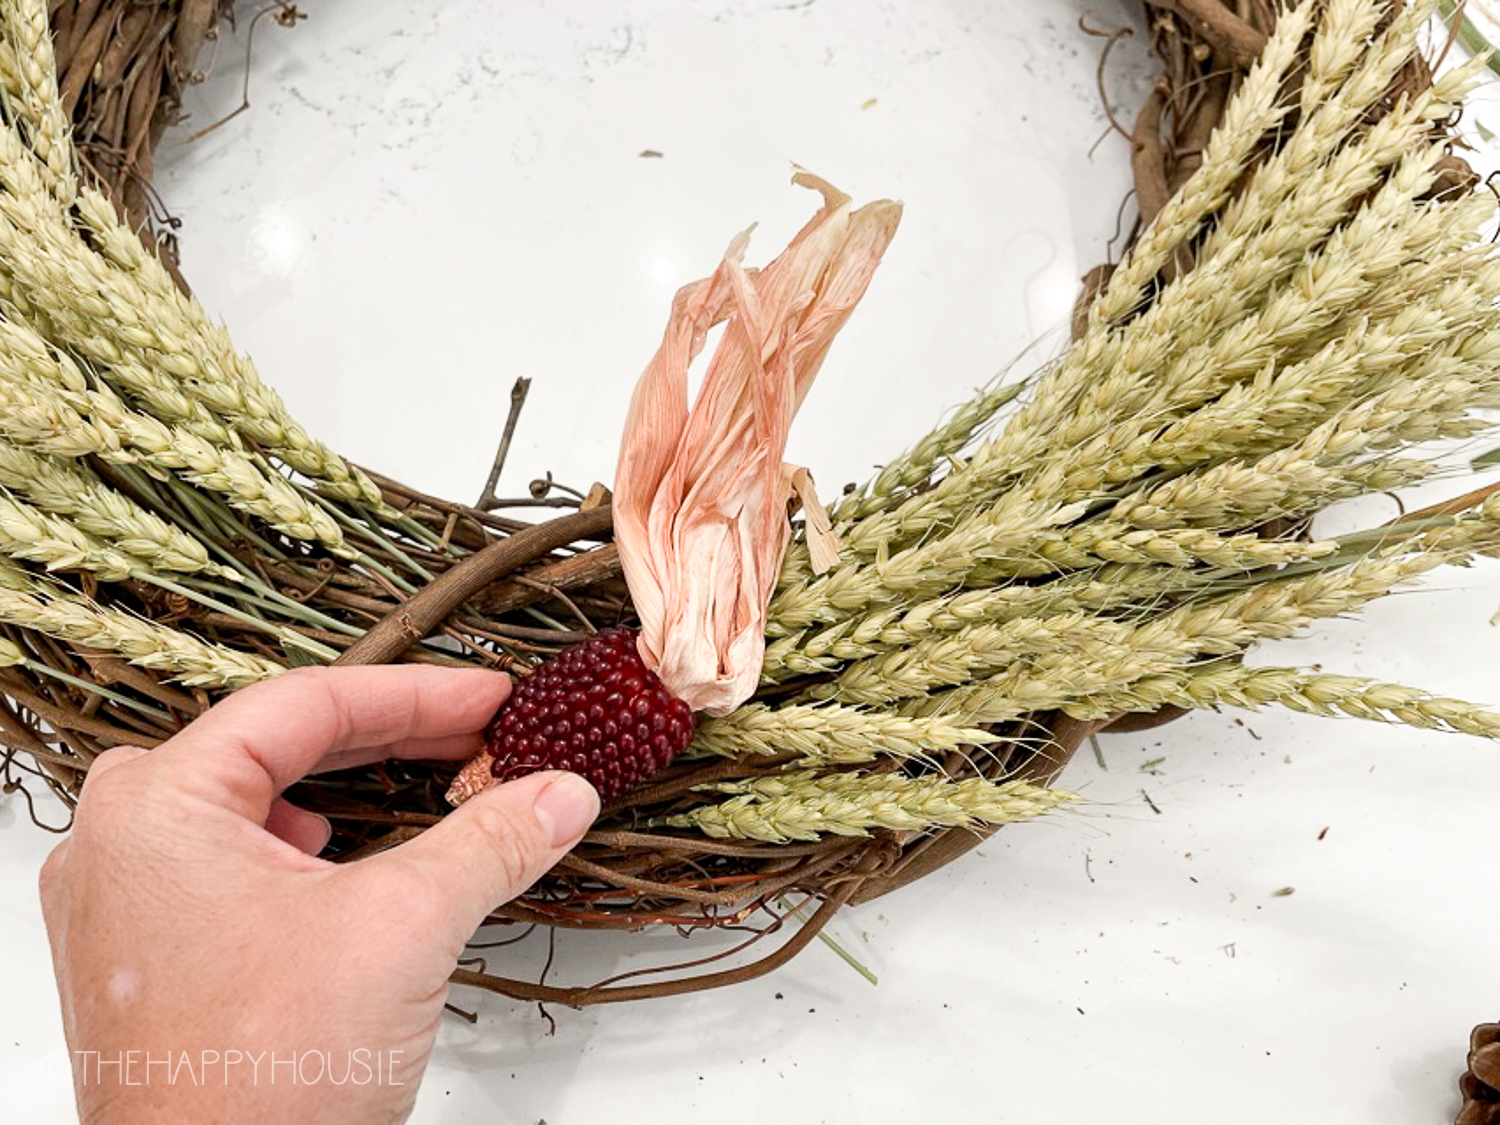 Showing how to attach the corn to the wreath.